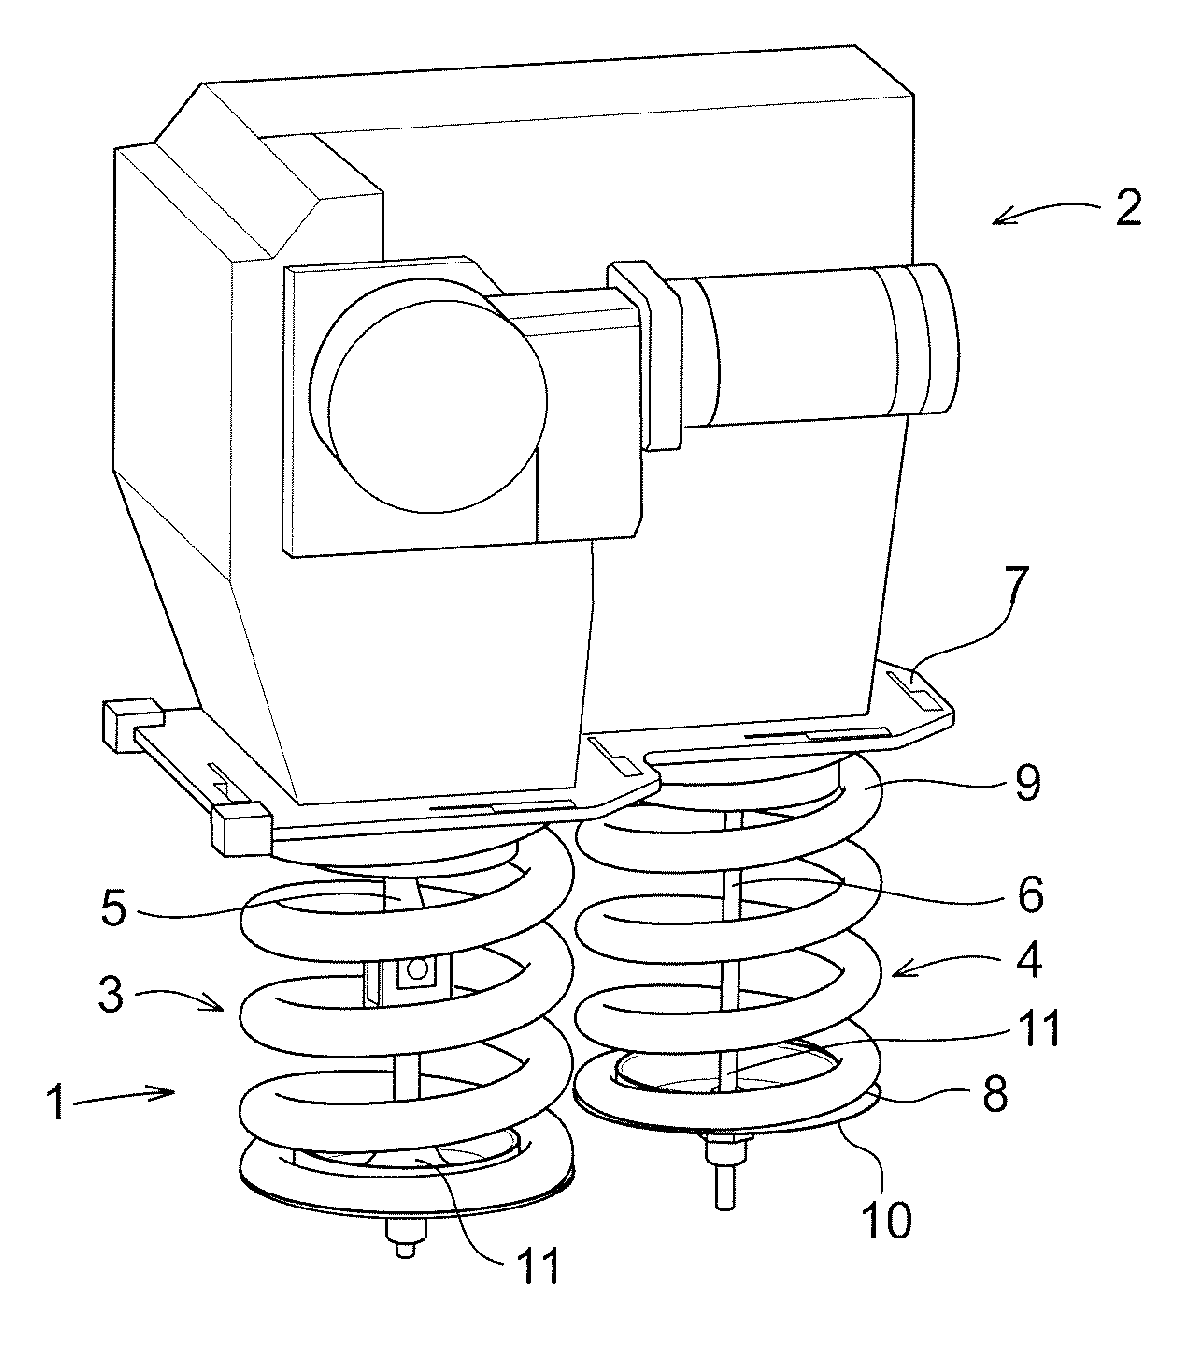 Spring Arrangement For Spring Drive Unit And Spring Drive Unit Comprising Spring Arrangement